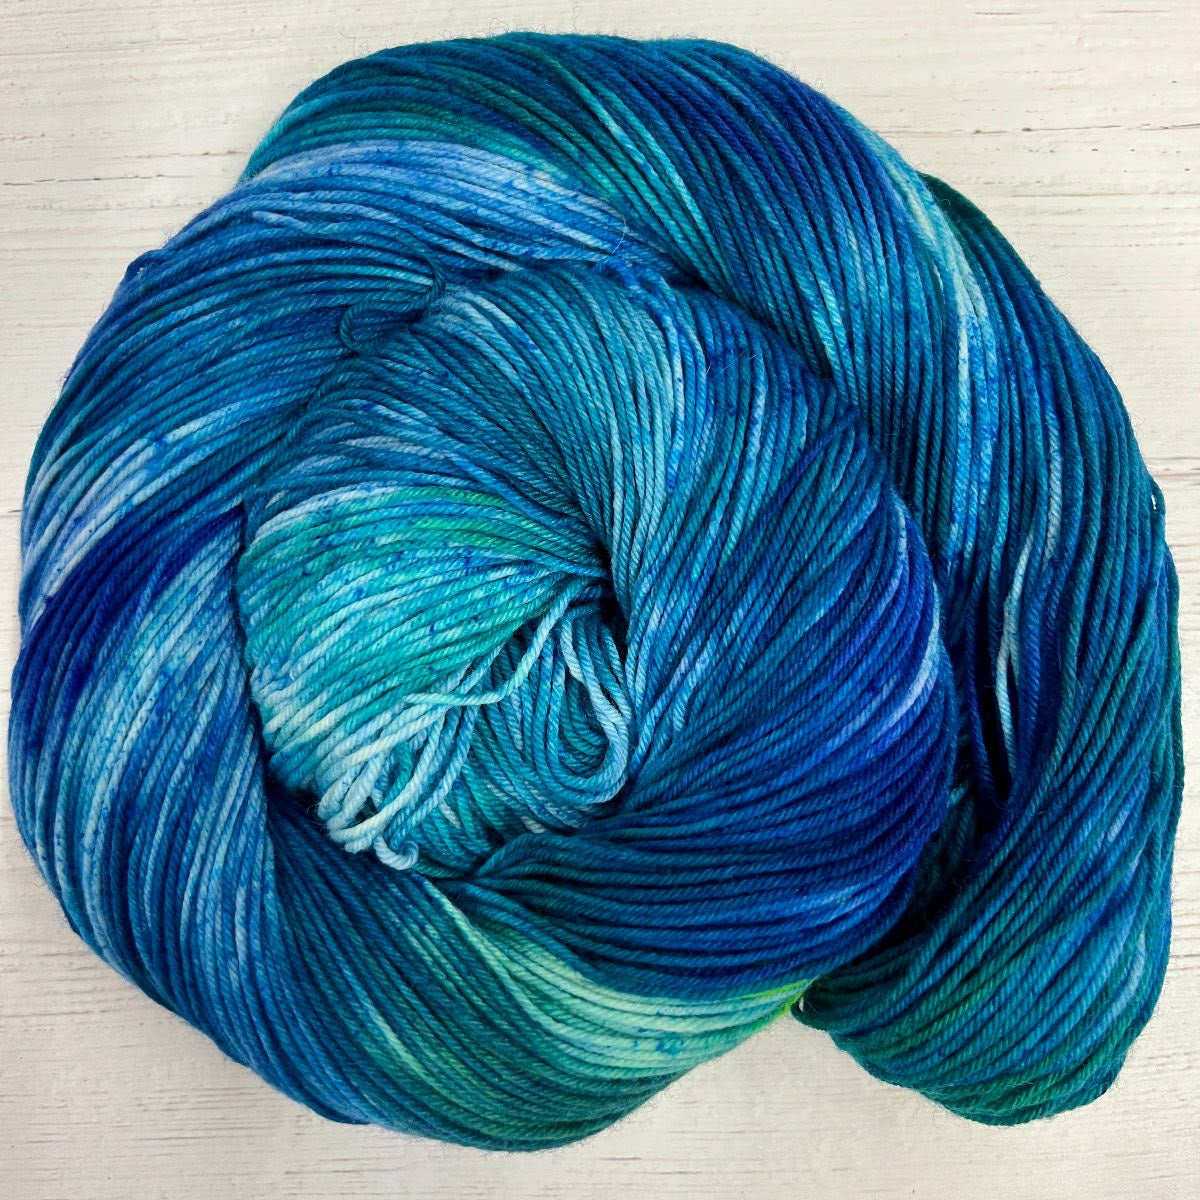 Knitted Wit Herstory 2022 color Burnout, a blue, teal, and green yarn, twisted into a spiral